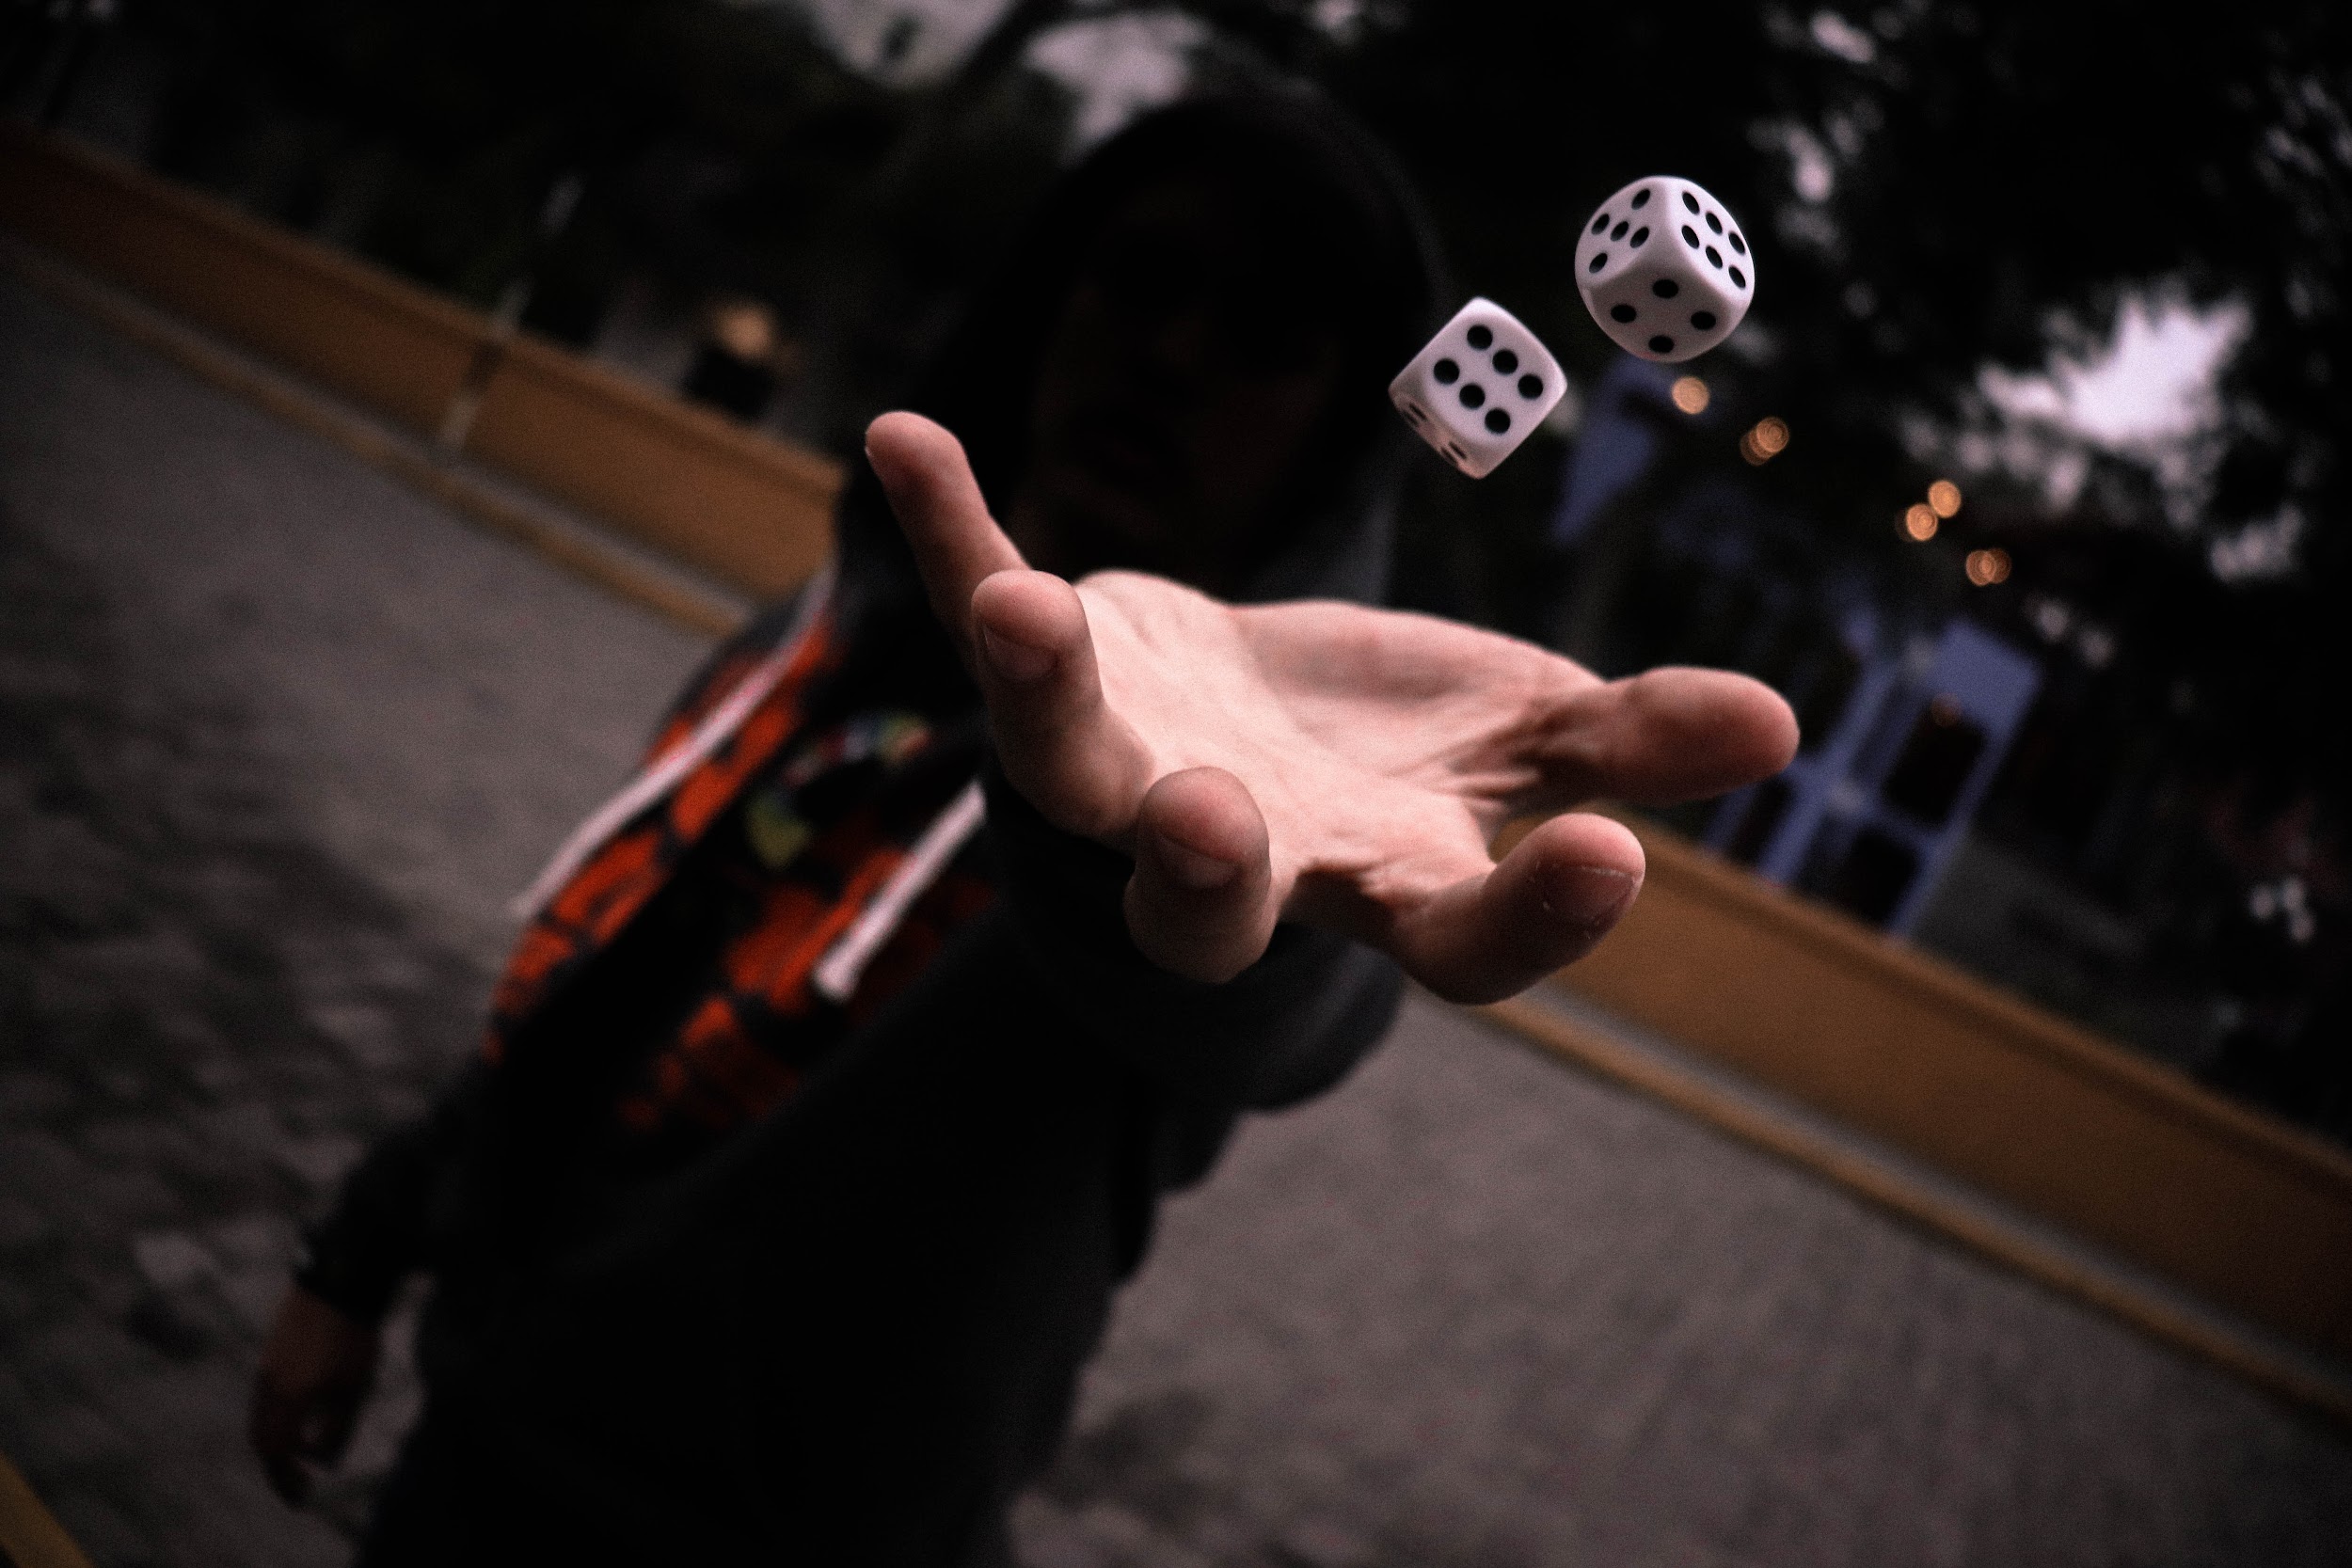 A person throwing dice from their left hand.